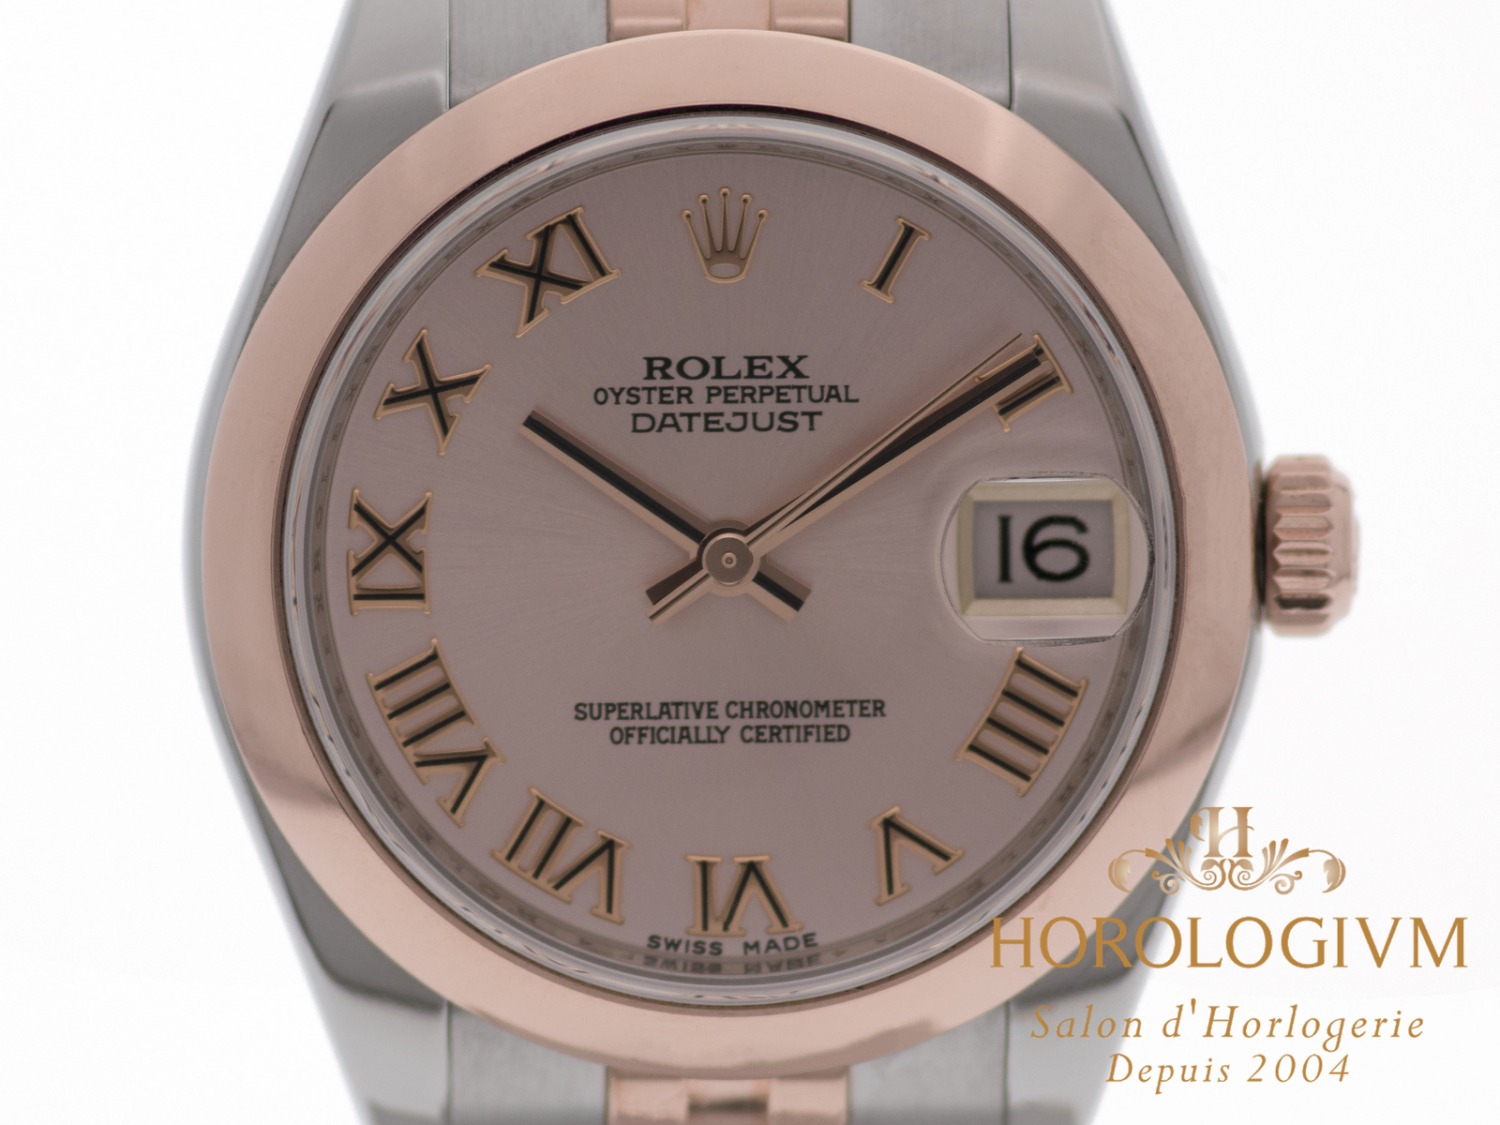 Rolex Datejust TWO-TONE 31MM Ref. 178241 watch,  two - tone (bi - colored) silver (case) and rose gold (bezel)